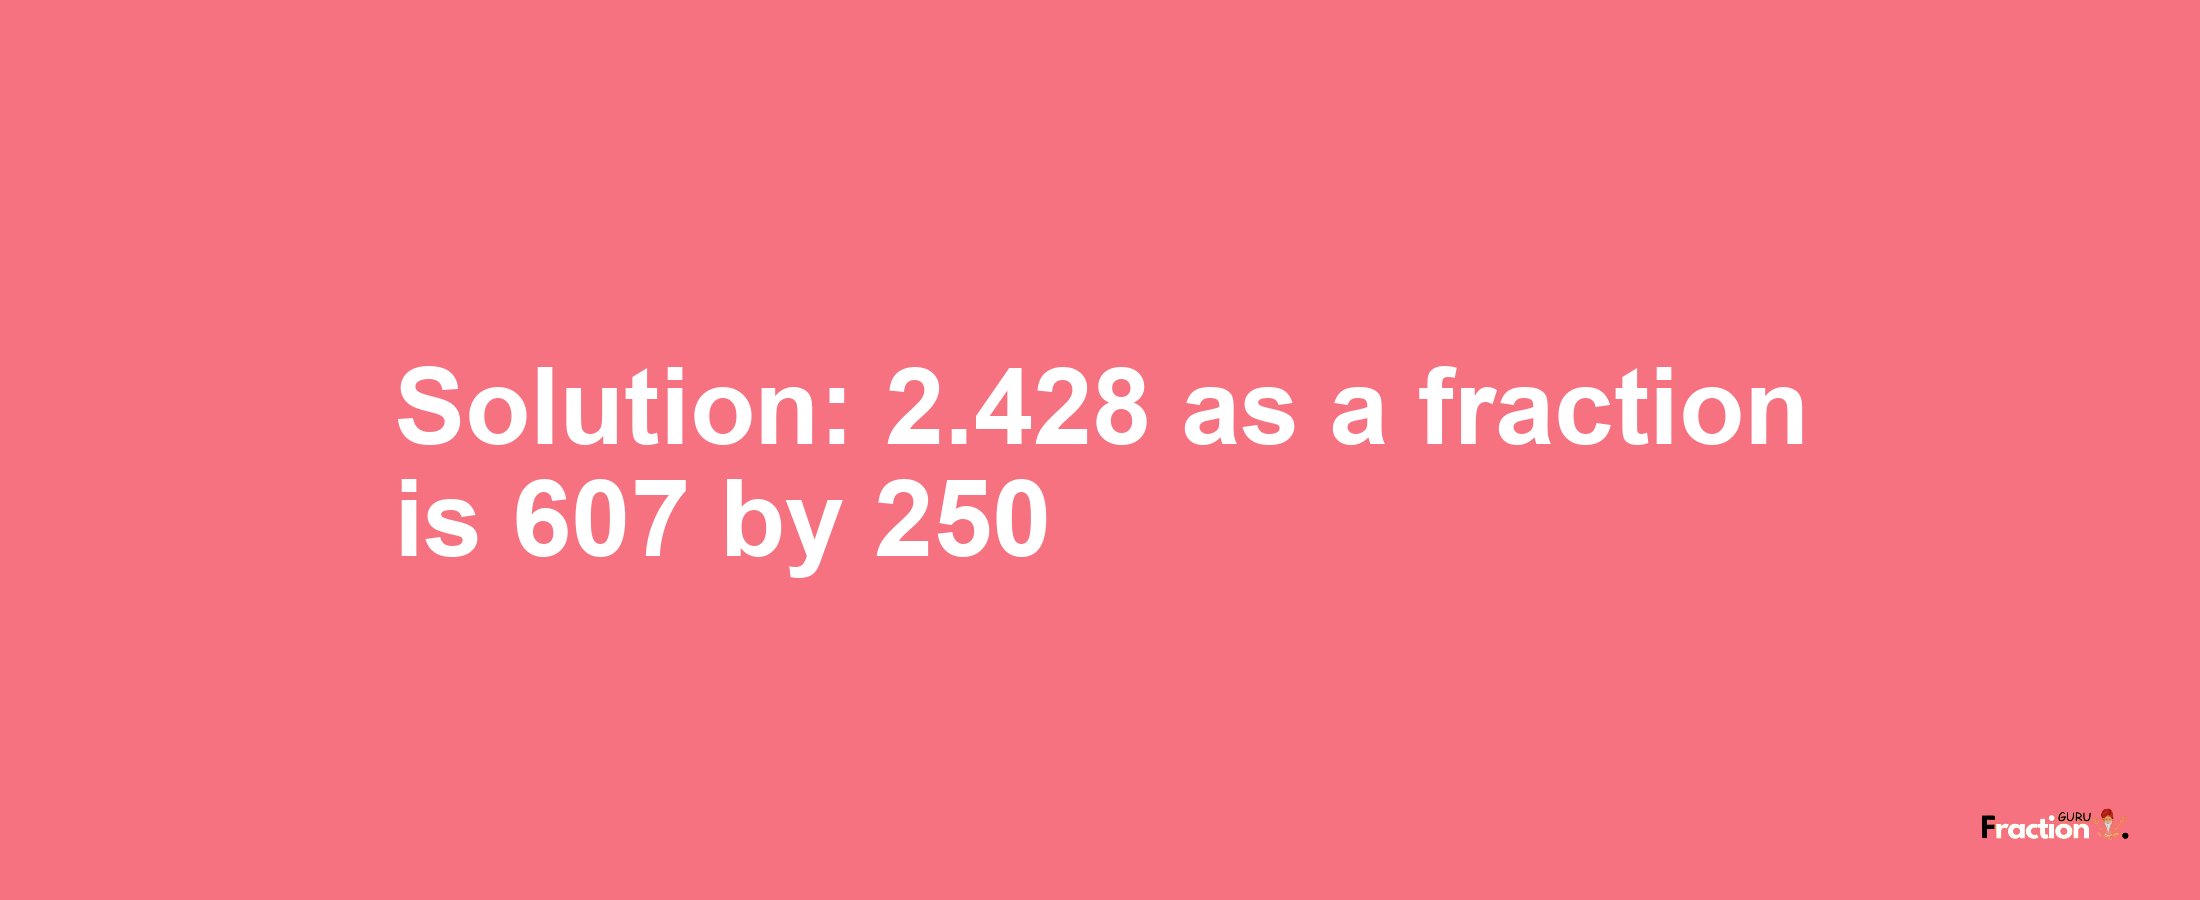 Solution:2.428 as a fraction is 607/250